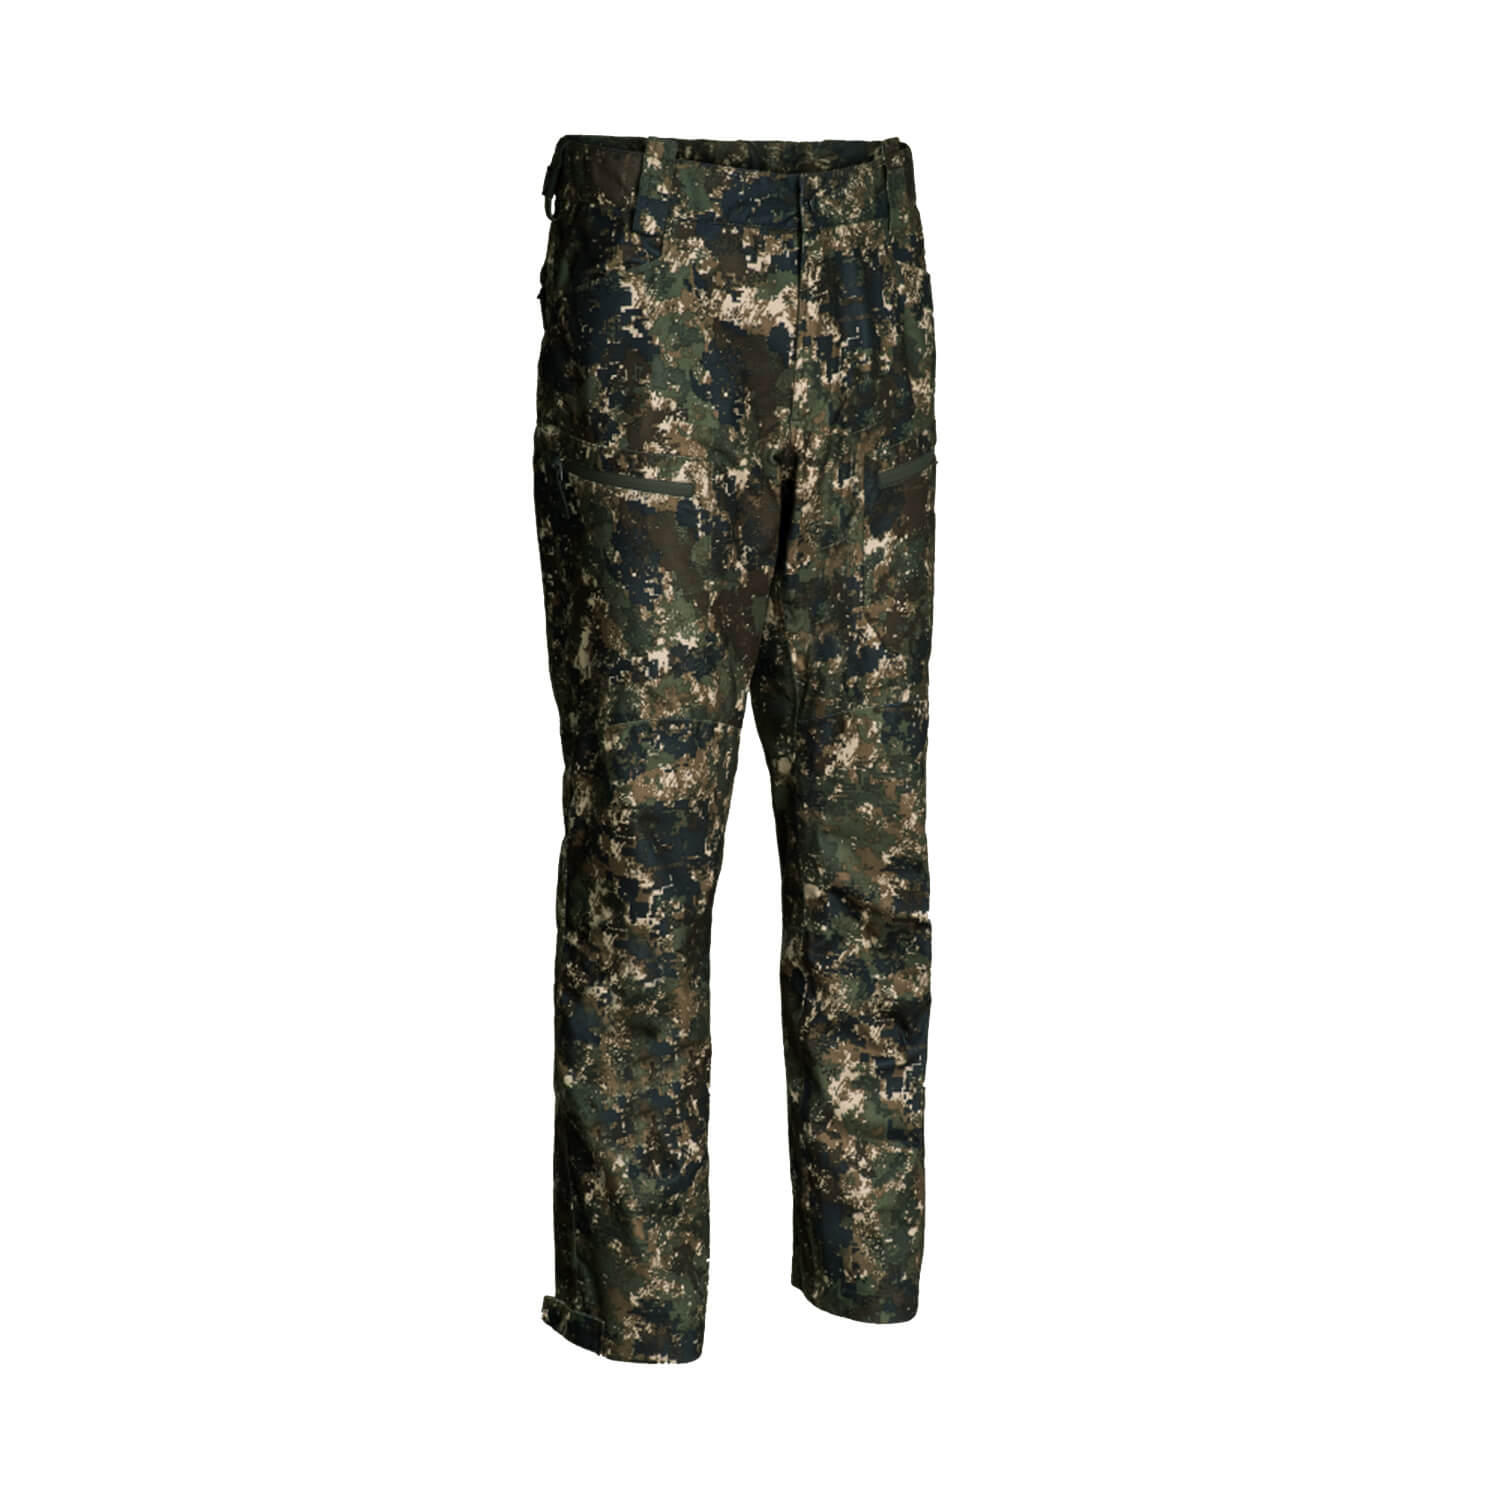 Northern Hunting trousers Skjold Arn G2 OPT2 - Camouflage Trousers